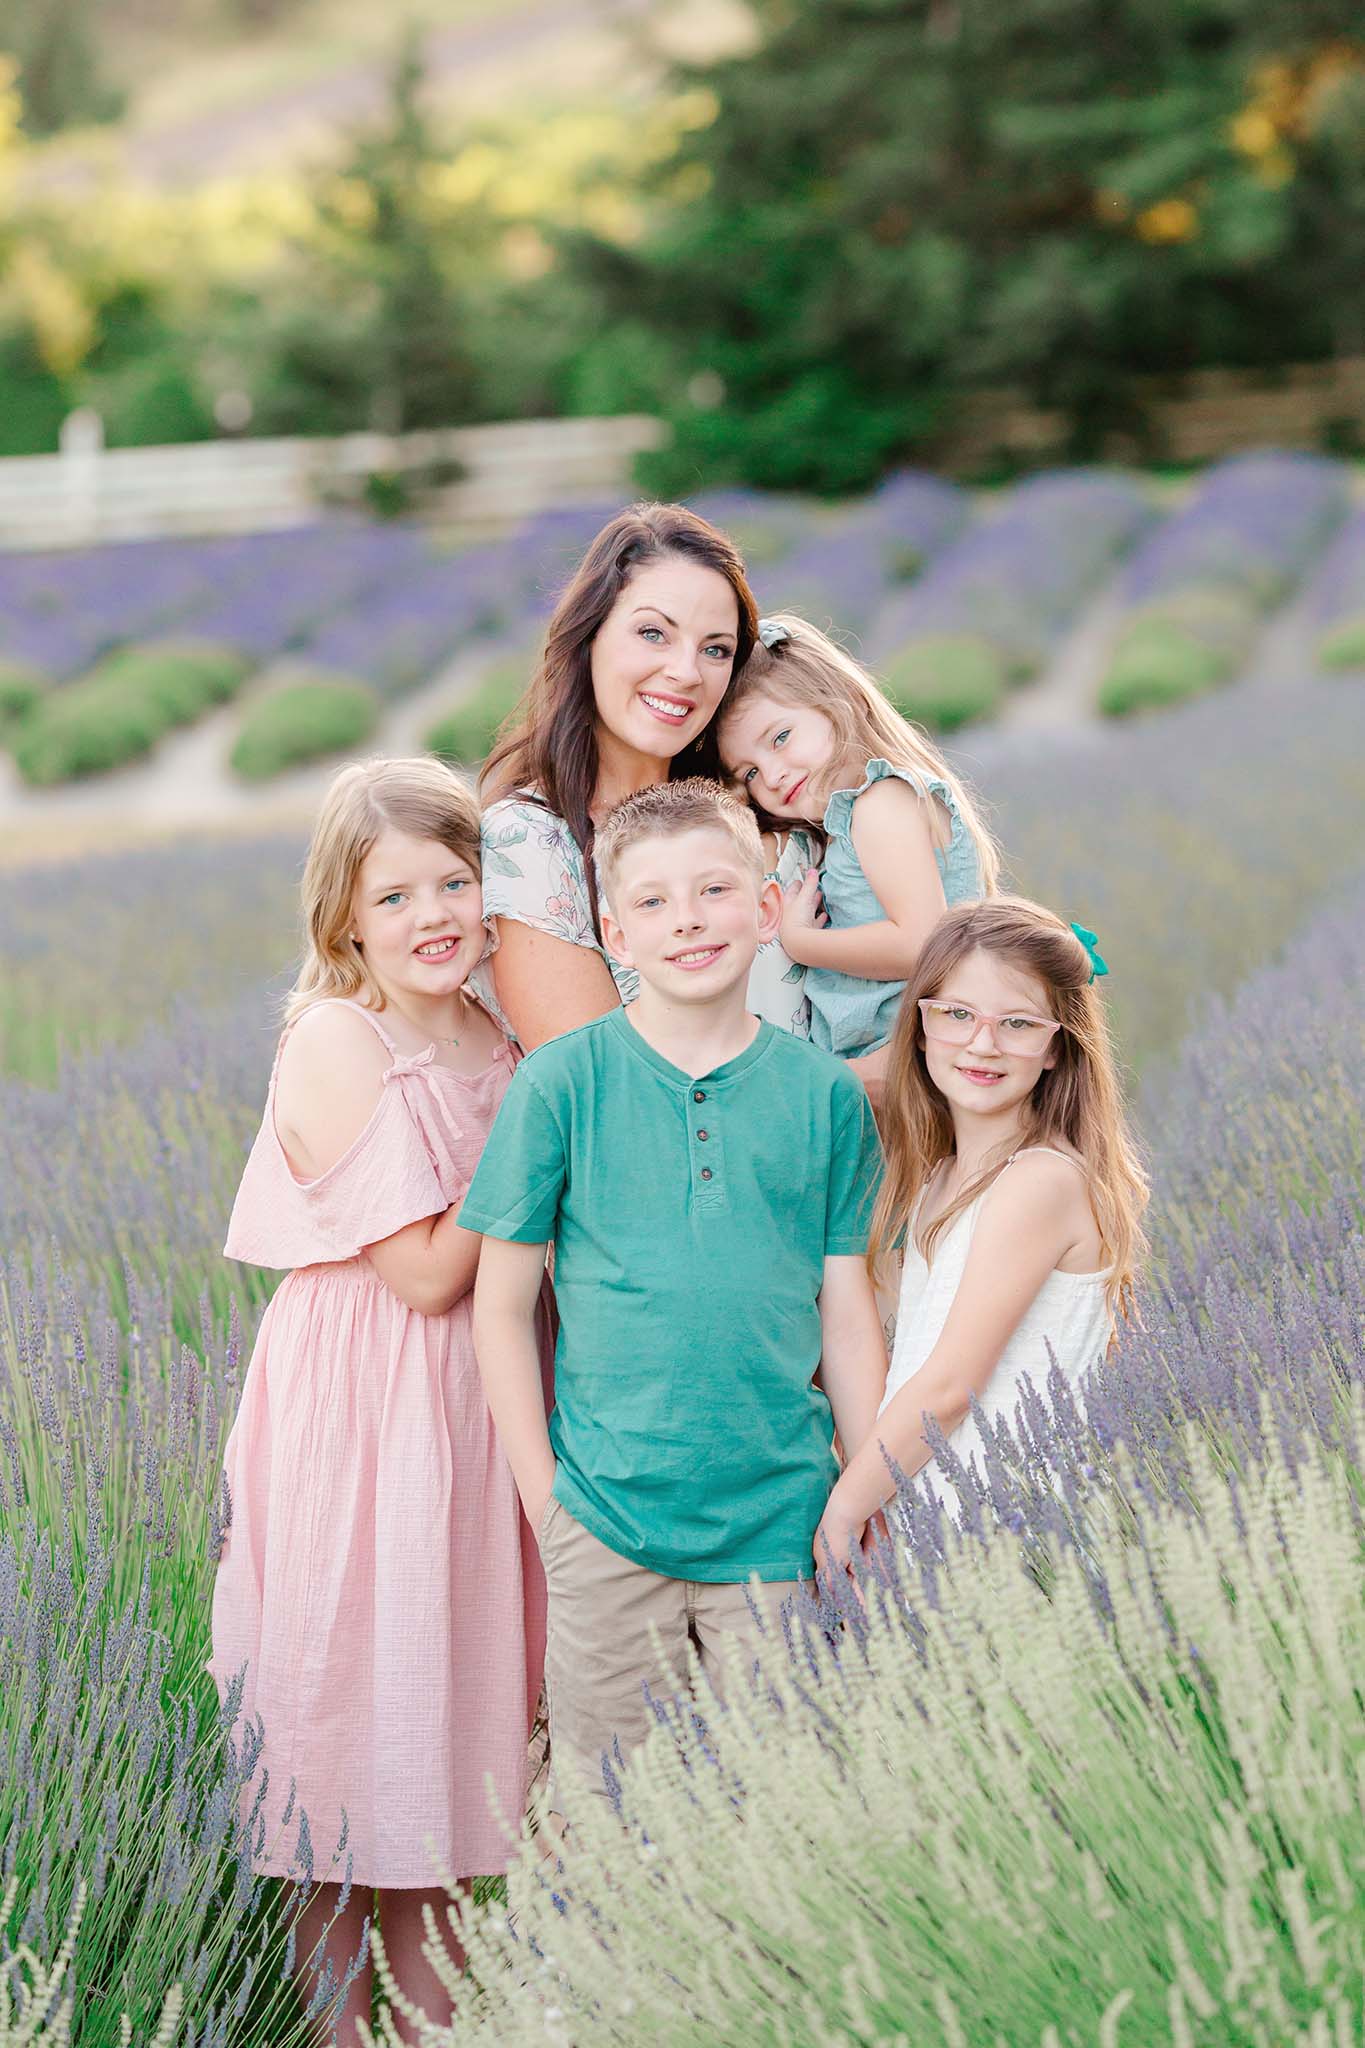 Family of 5 in a lavender field